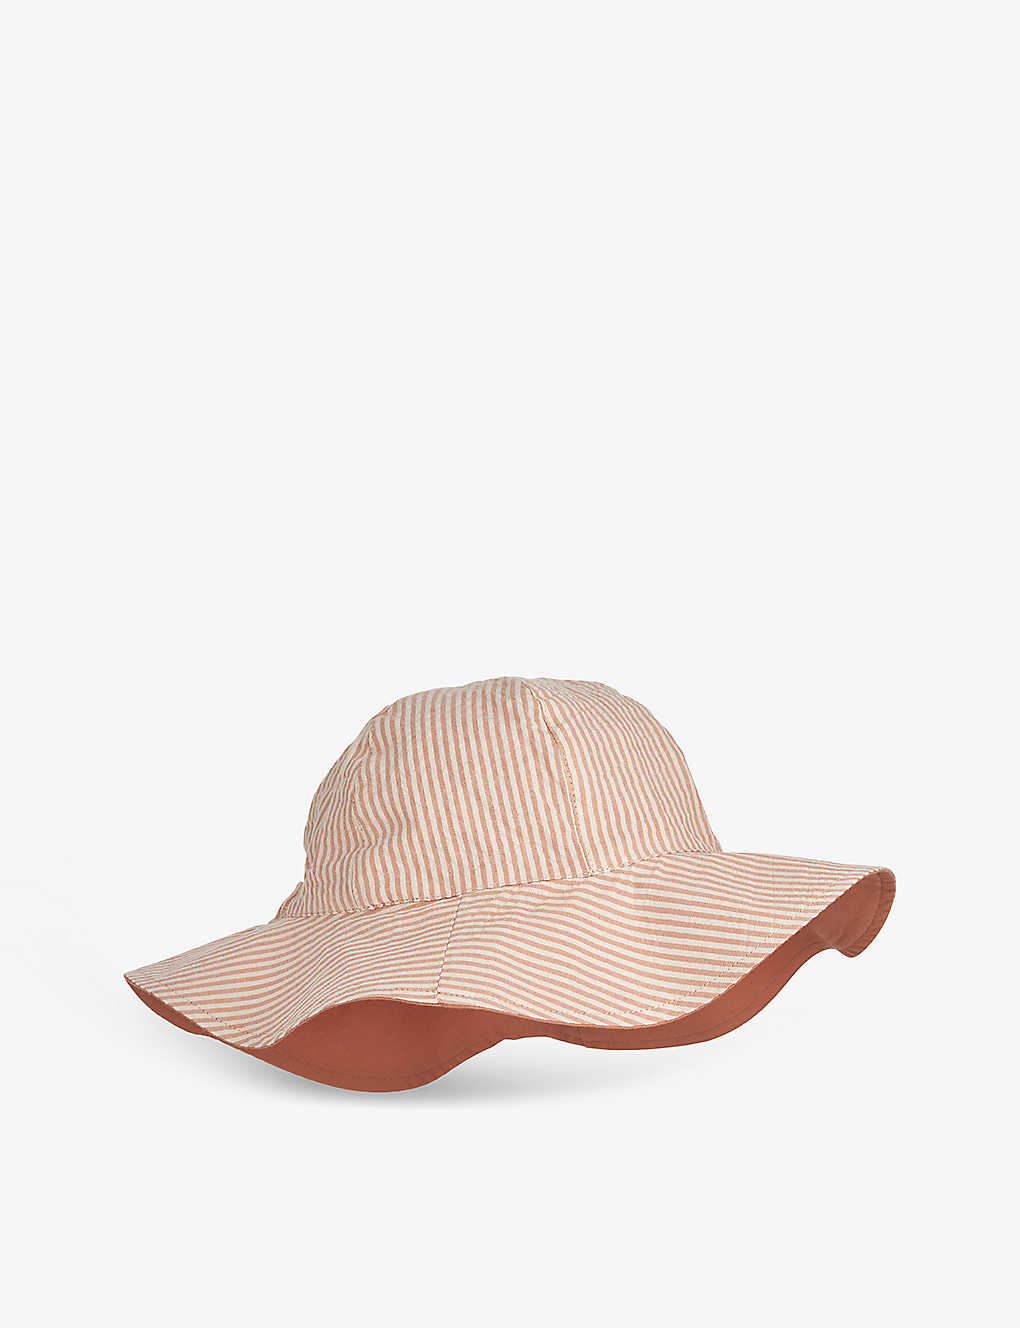 Liewood Kids' Amelie Reversible Organic-cotton Sun Hat 3 Months - 10 Years In Stripe Tuscany/sandy